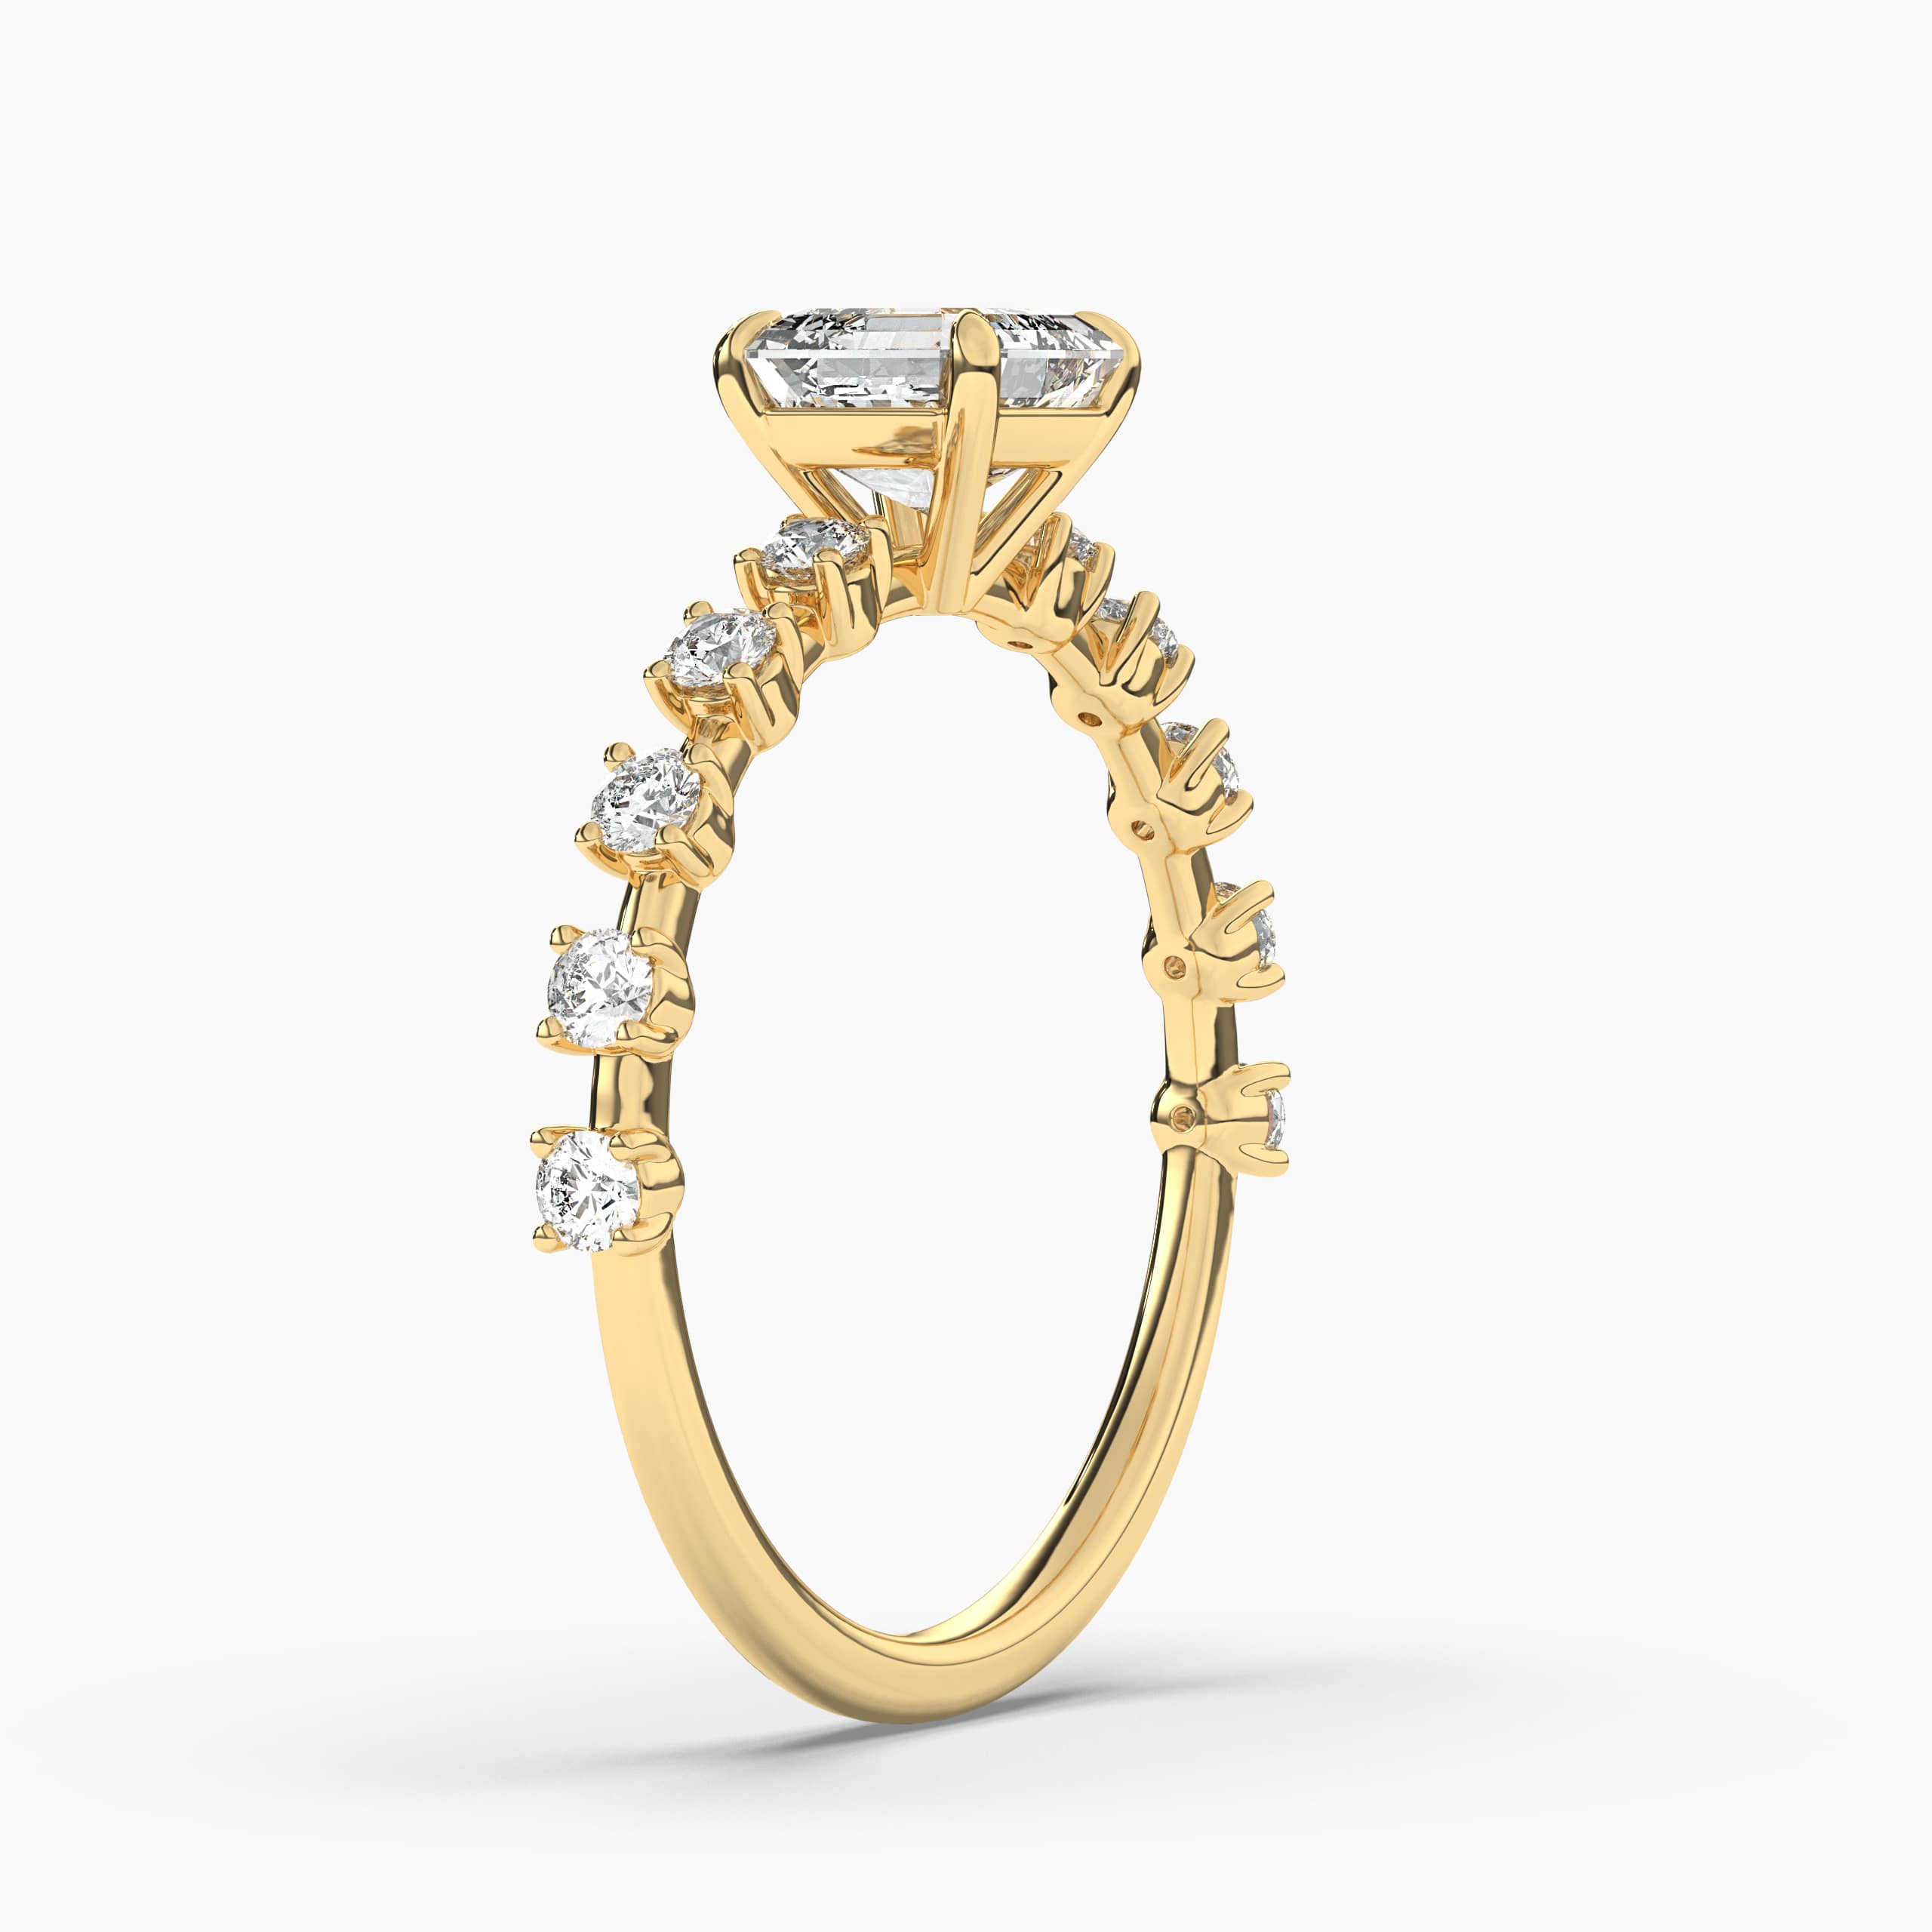   Diamond Engagement Ring in Yellow Gold